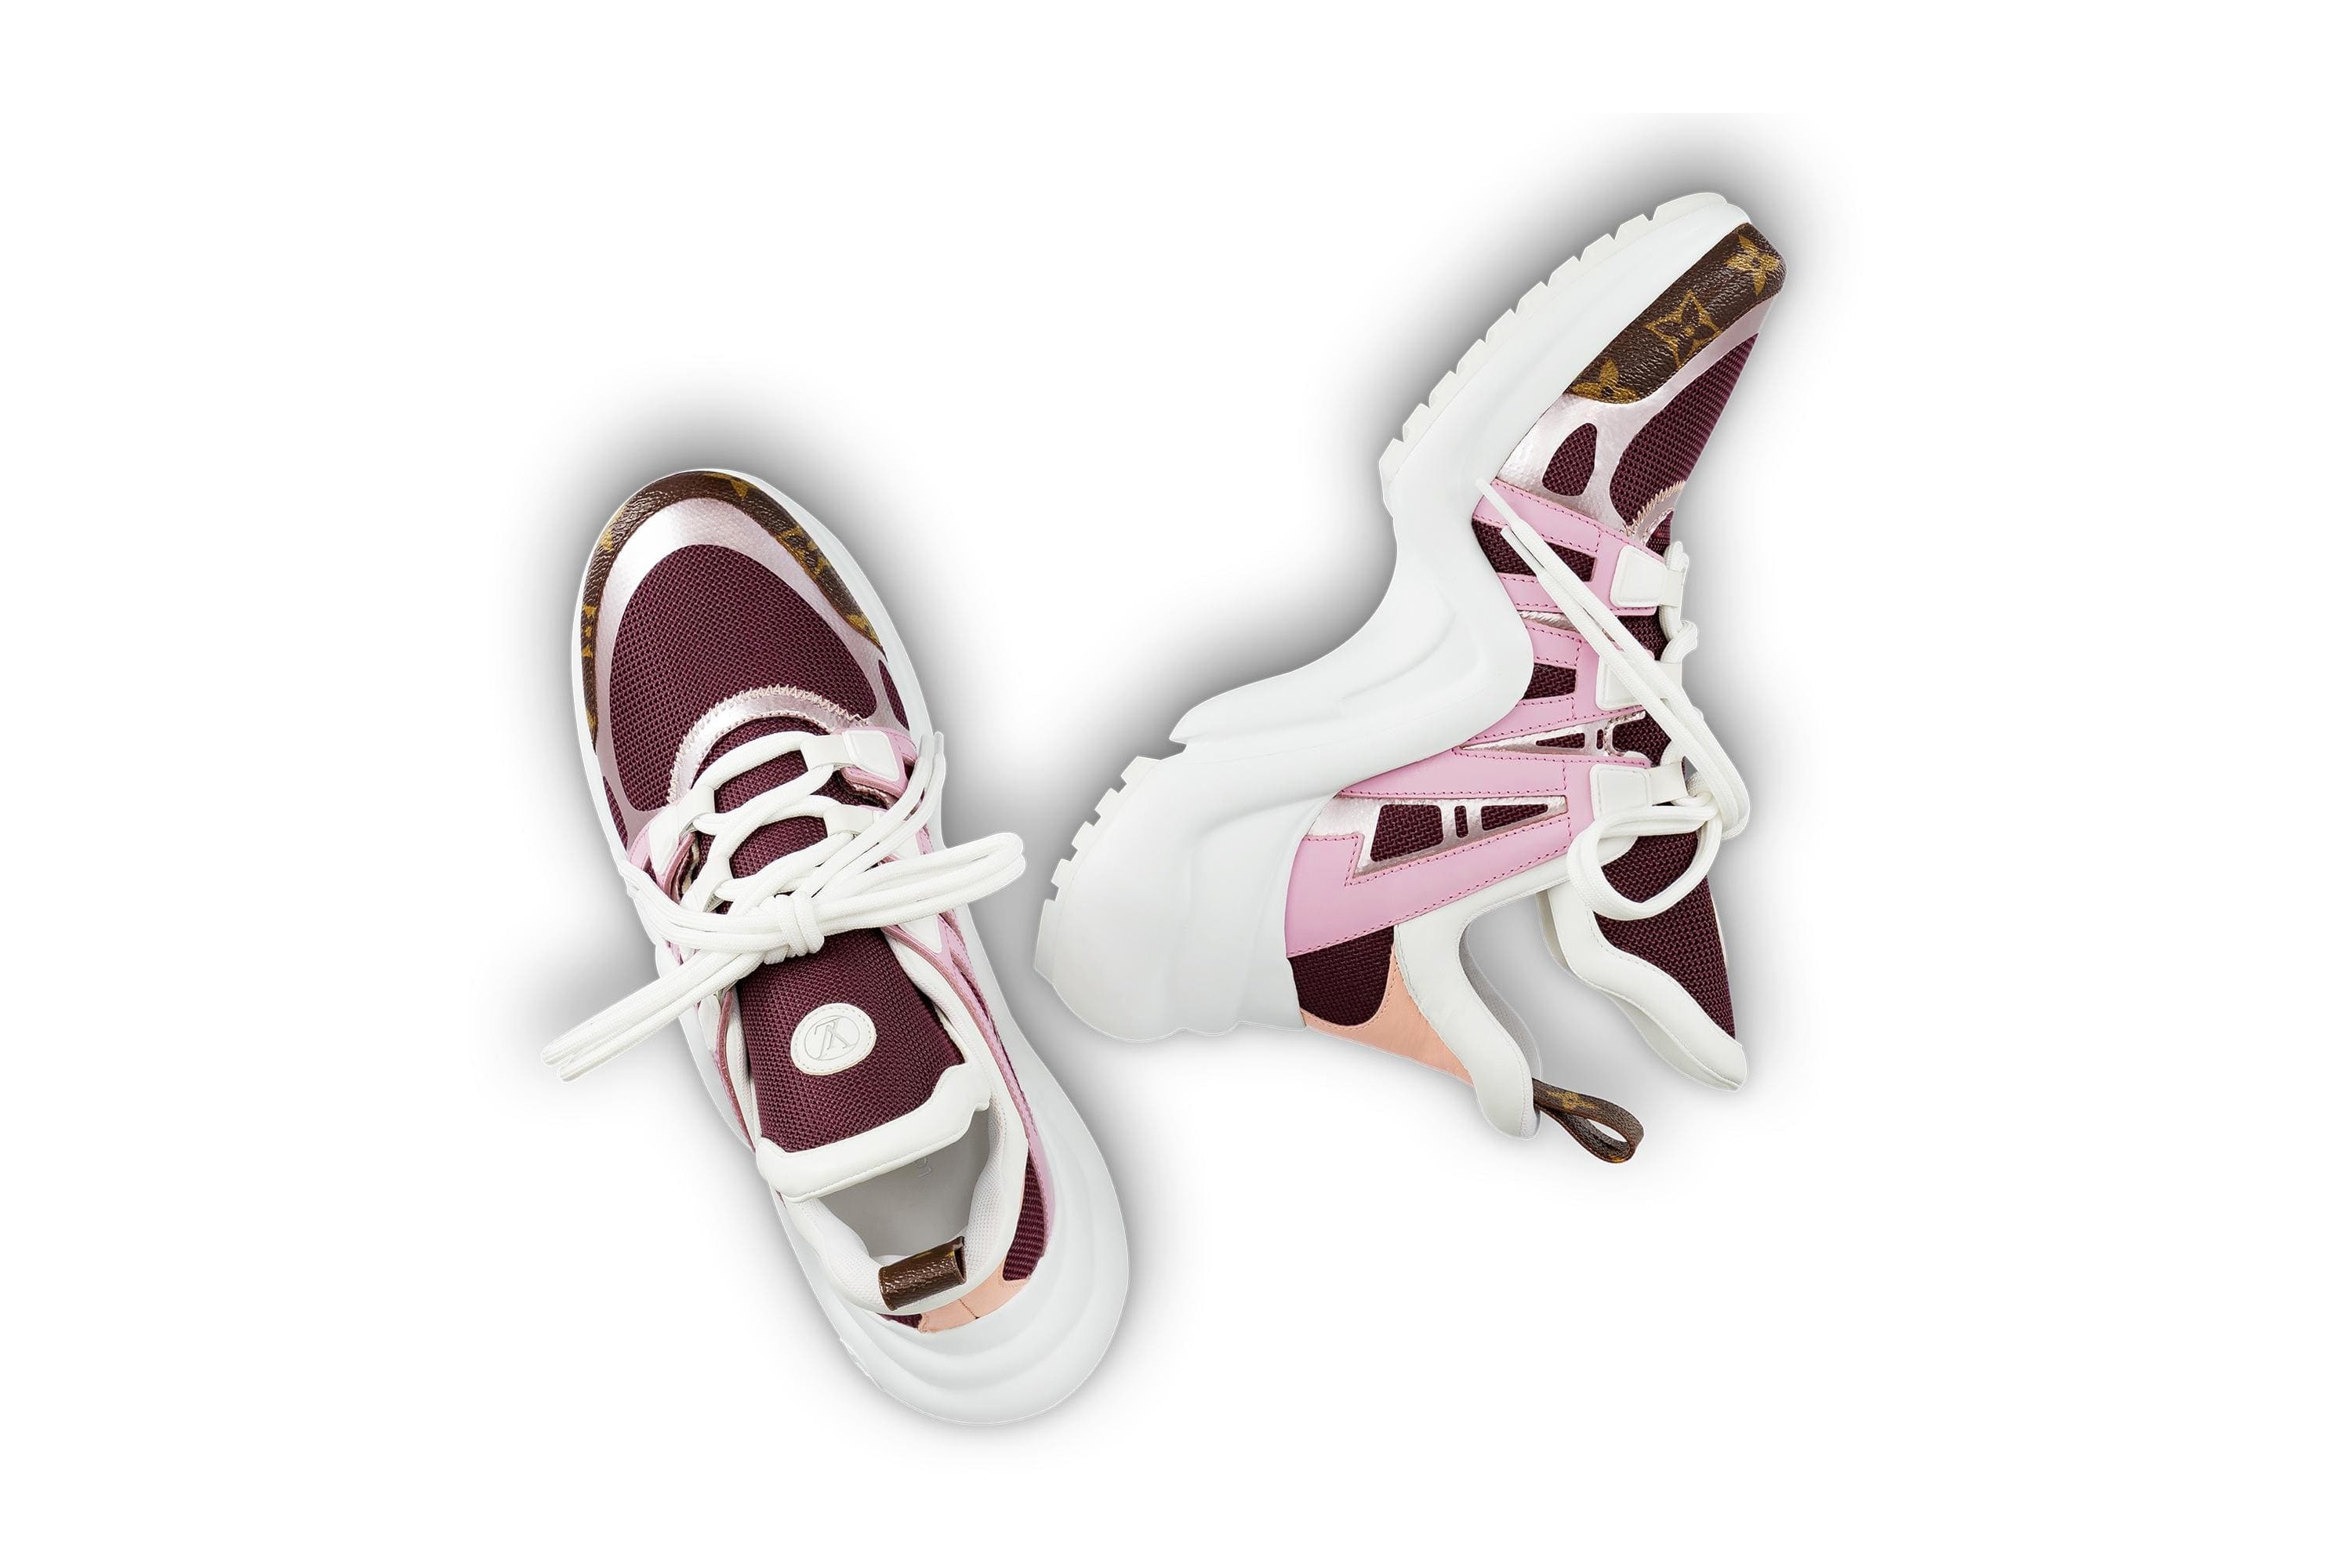 Louis Vuitton Archlight Sneakers Pink Black Gold Red Metallic White Sole Where to Buy